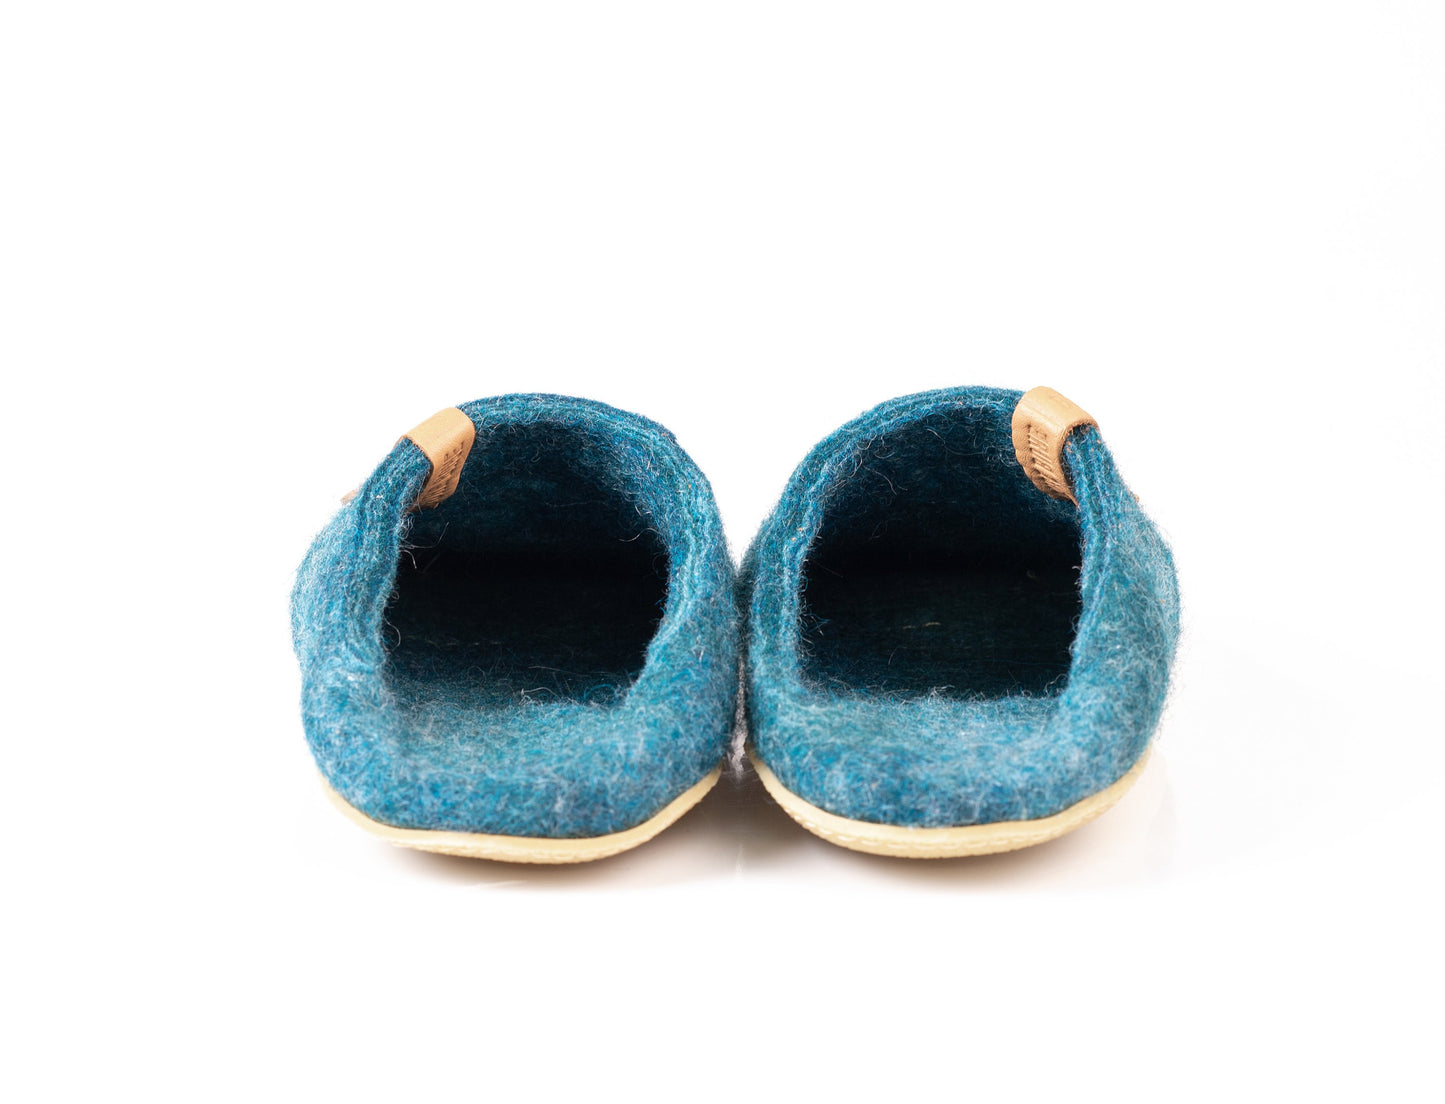 The back of the backless felted wool slippers for women